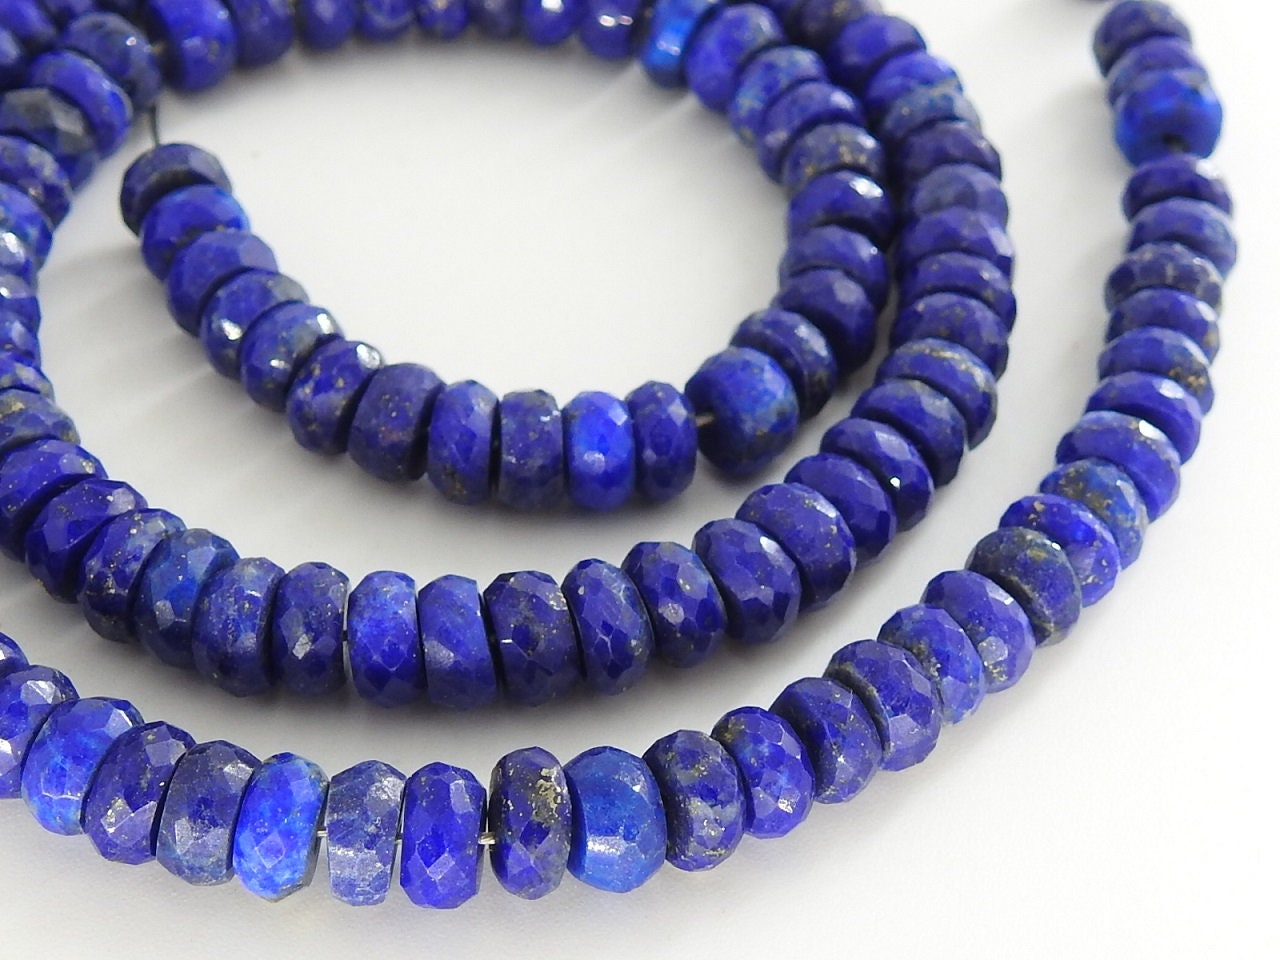 Lapis Lazuli Faceted Roundel Bead,Loose Stone,Handmade,Necklace,For Making Jewelry,Beaded Bracelet,Wholesaler 100%Natural B6 | Save 33% - Rajasthan Living 22